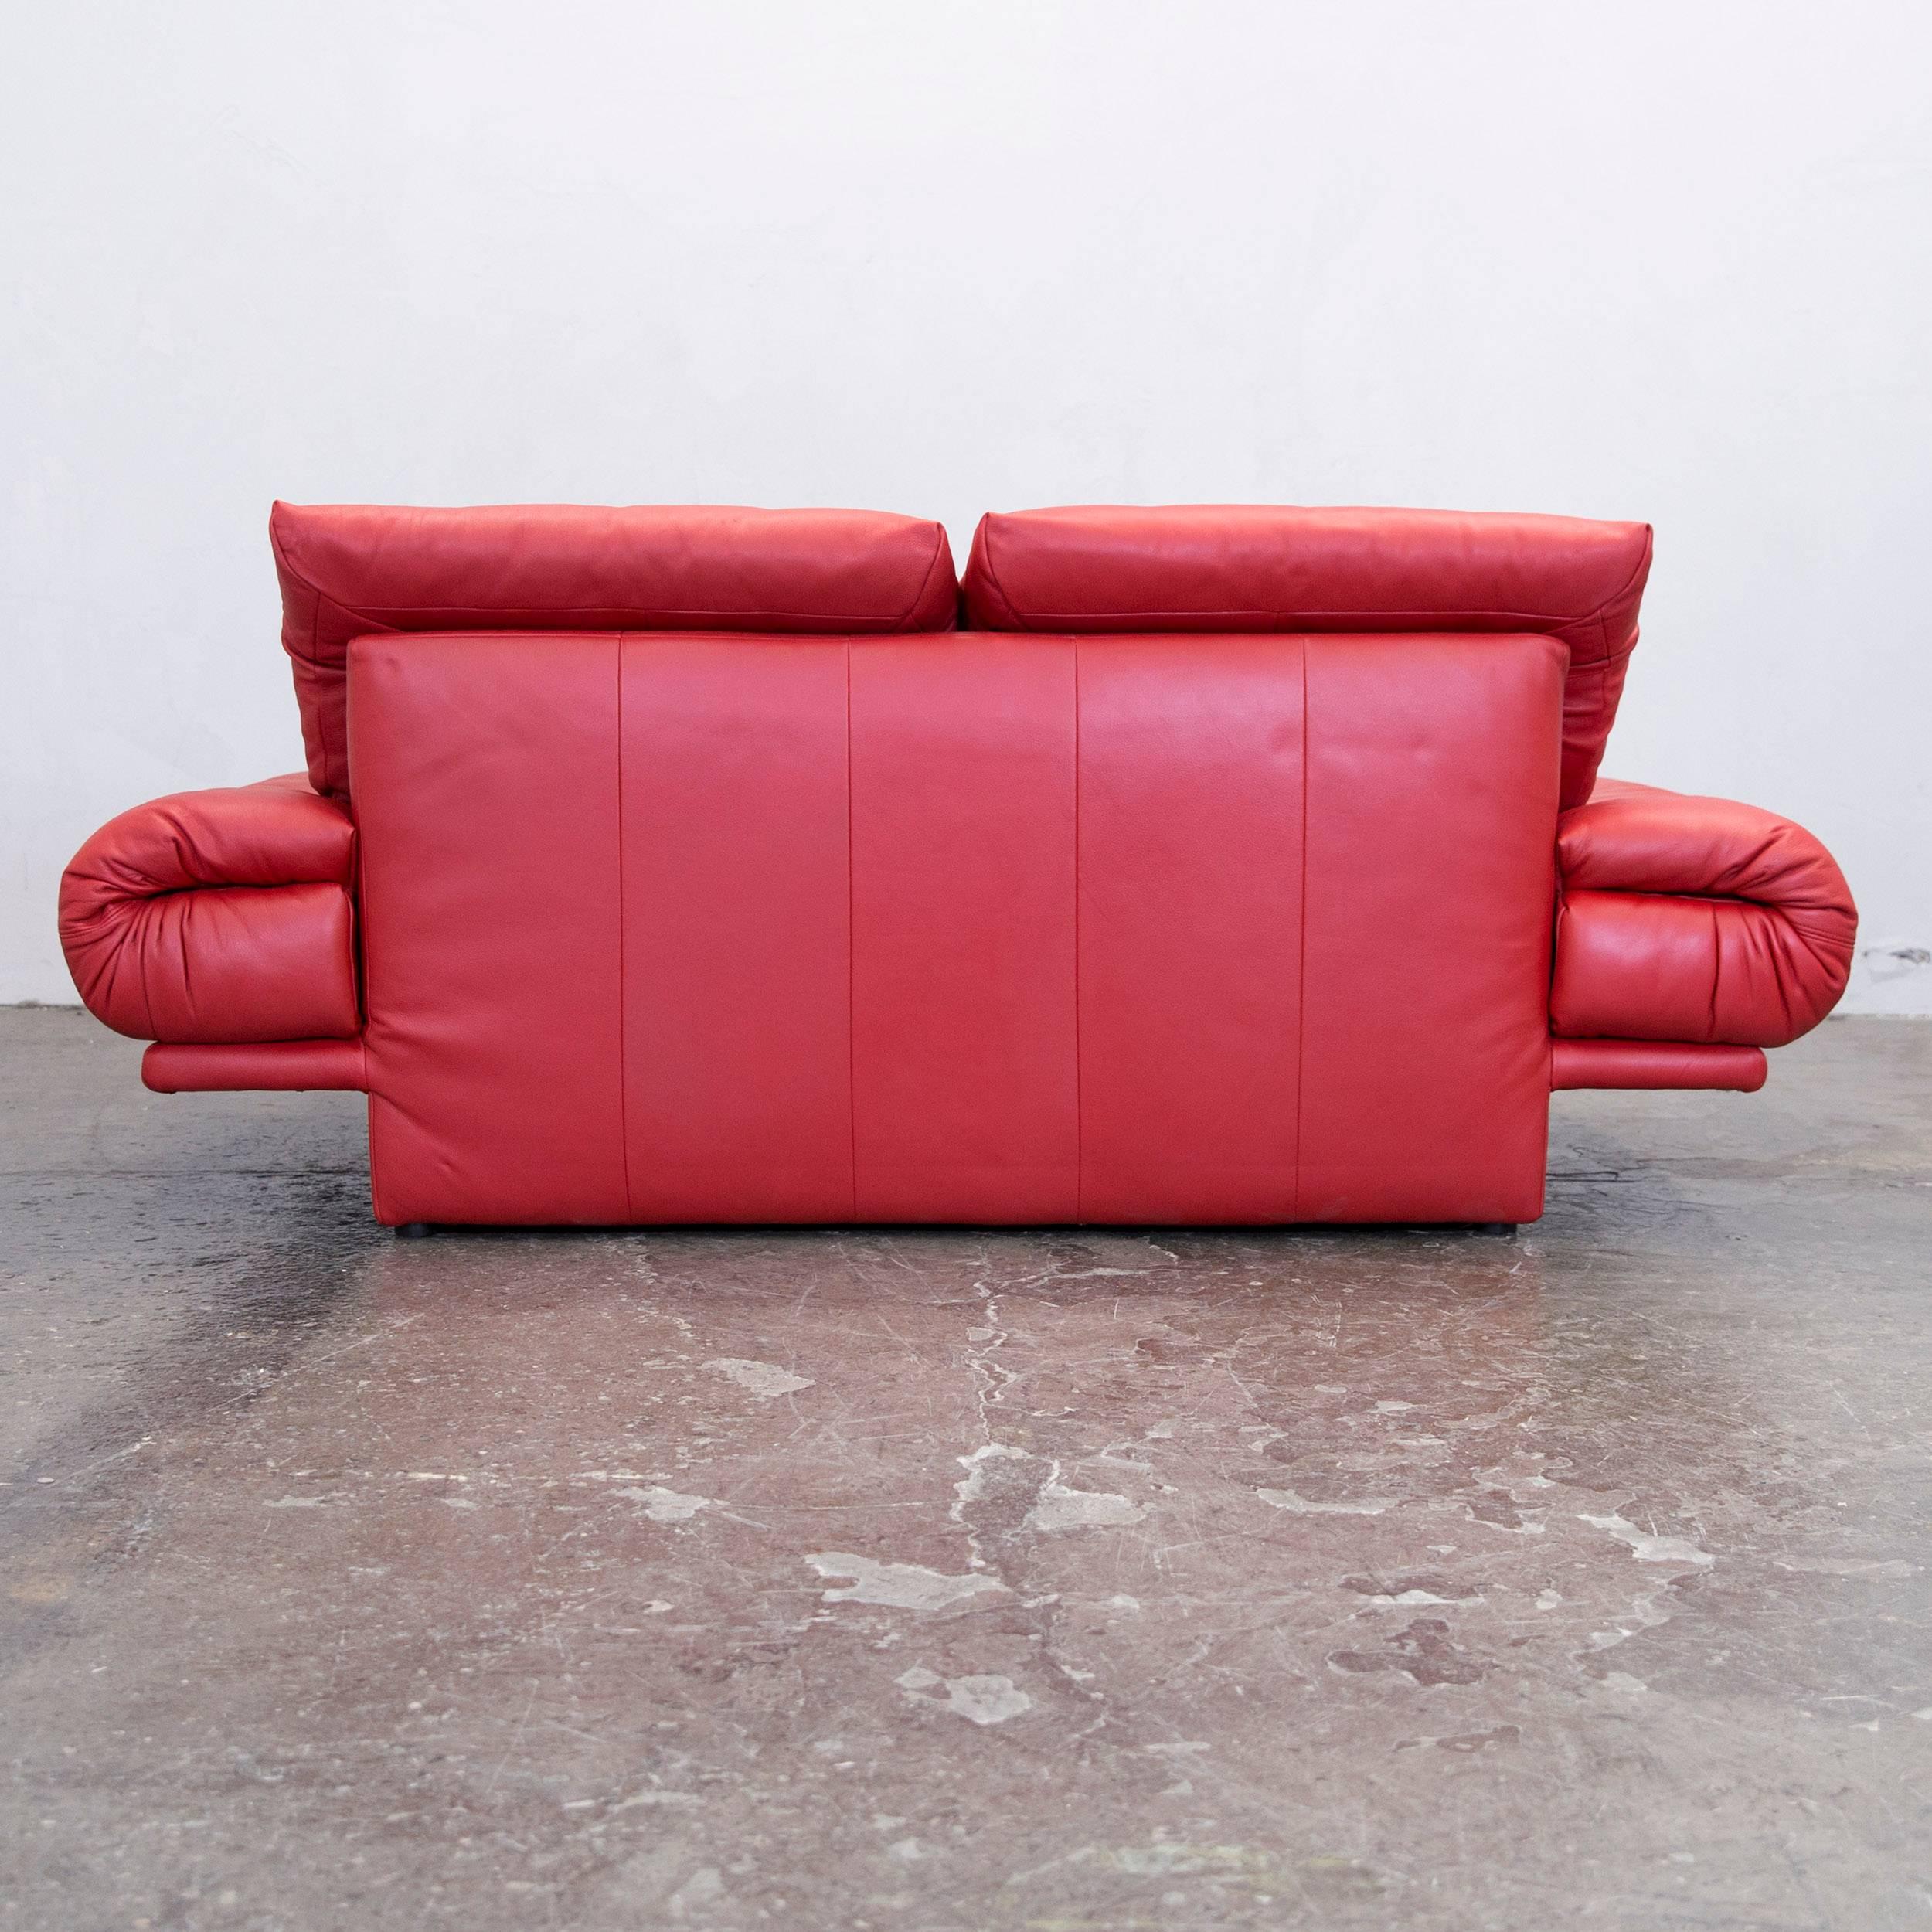 Rolf Benz Designer Leather Sofa Two-Seat Couch, Red Leather, Modern 5